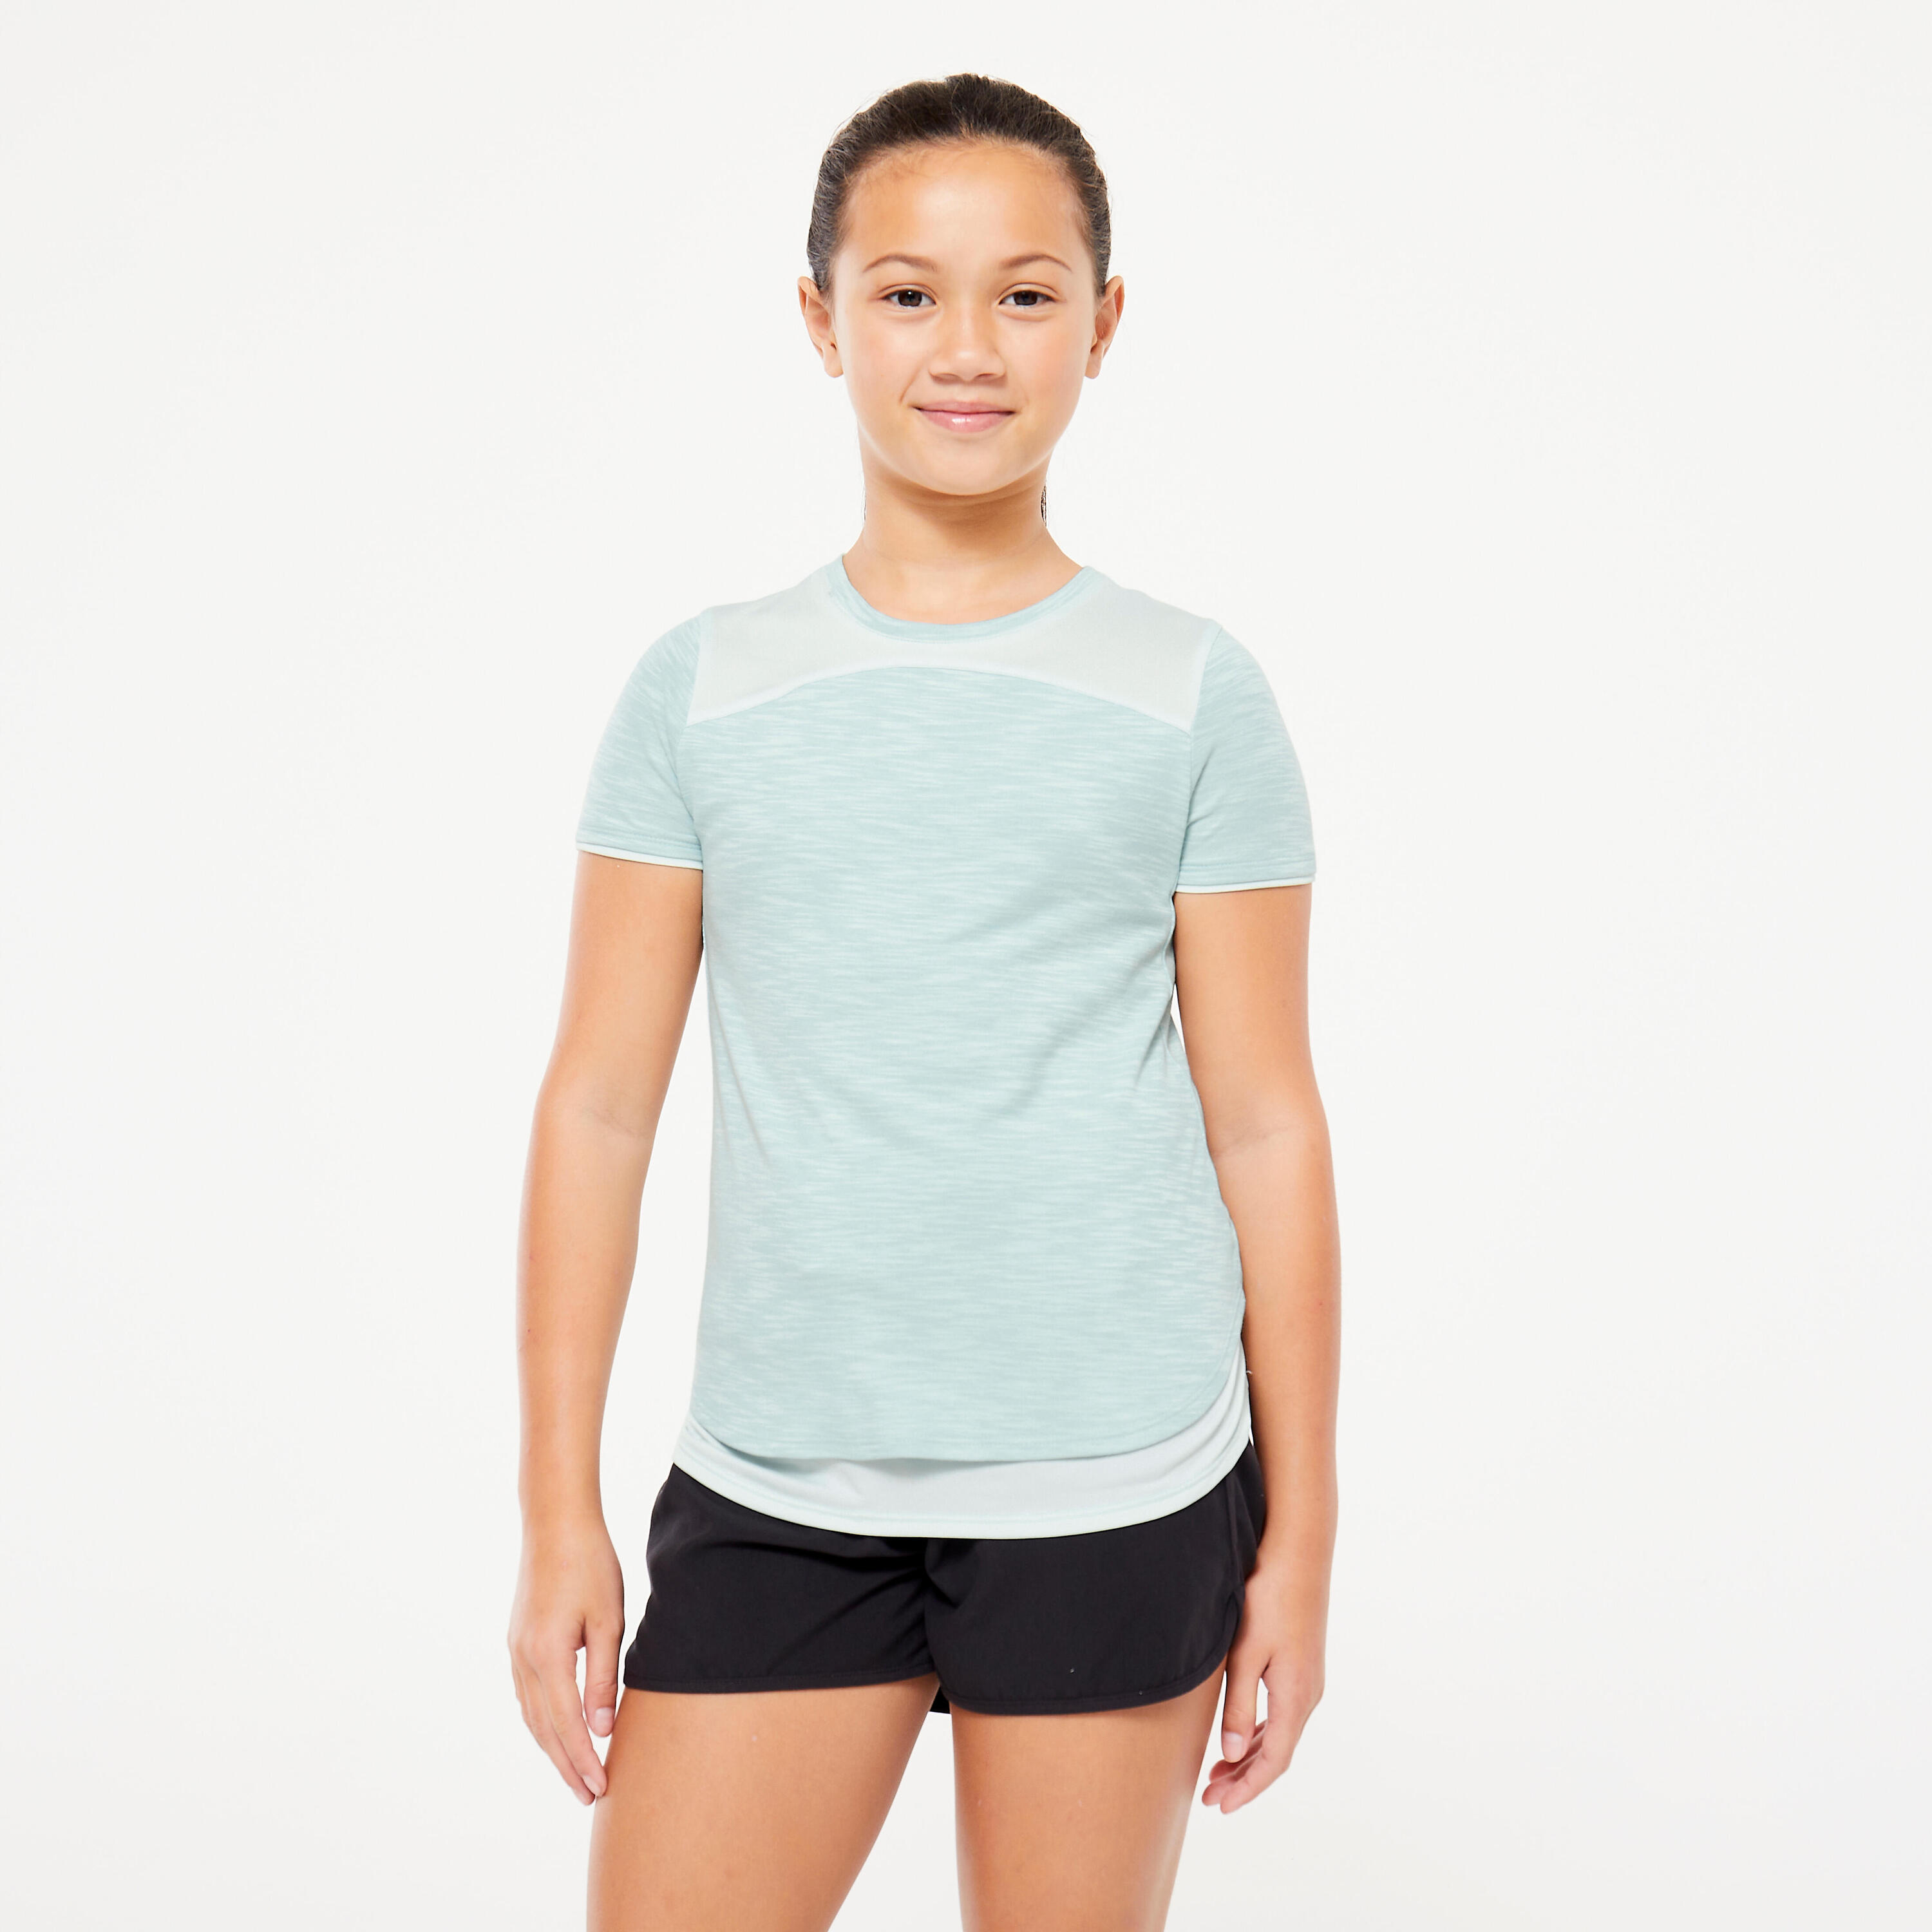 DOMYOS Girls' 2-in-1 T-Shirt - Turquoise